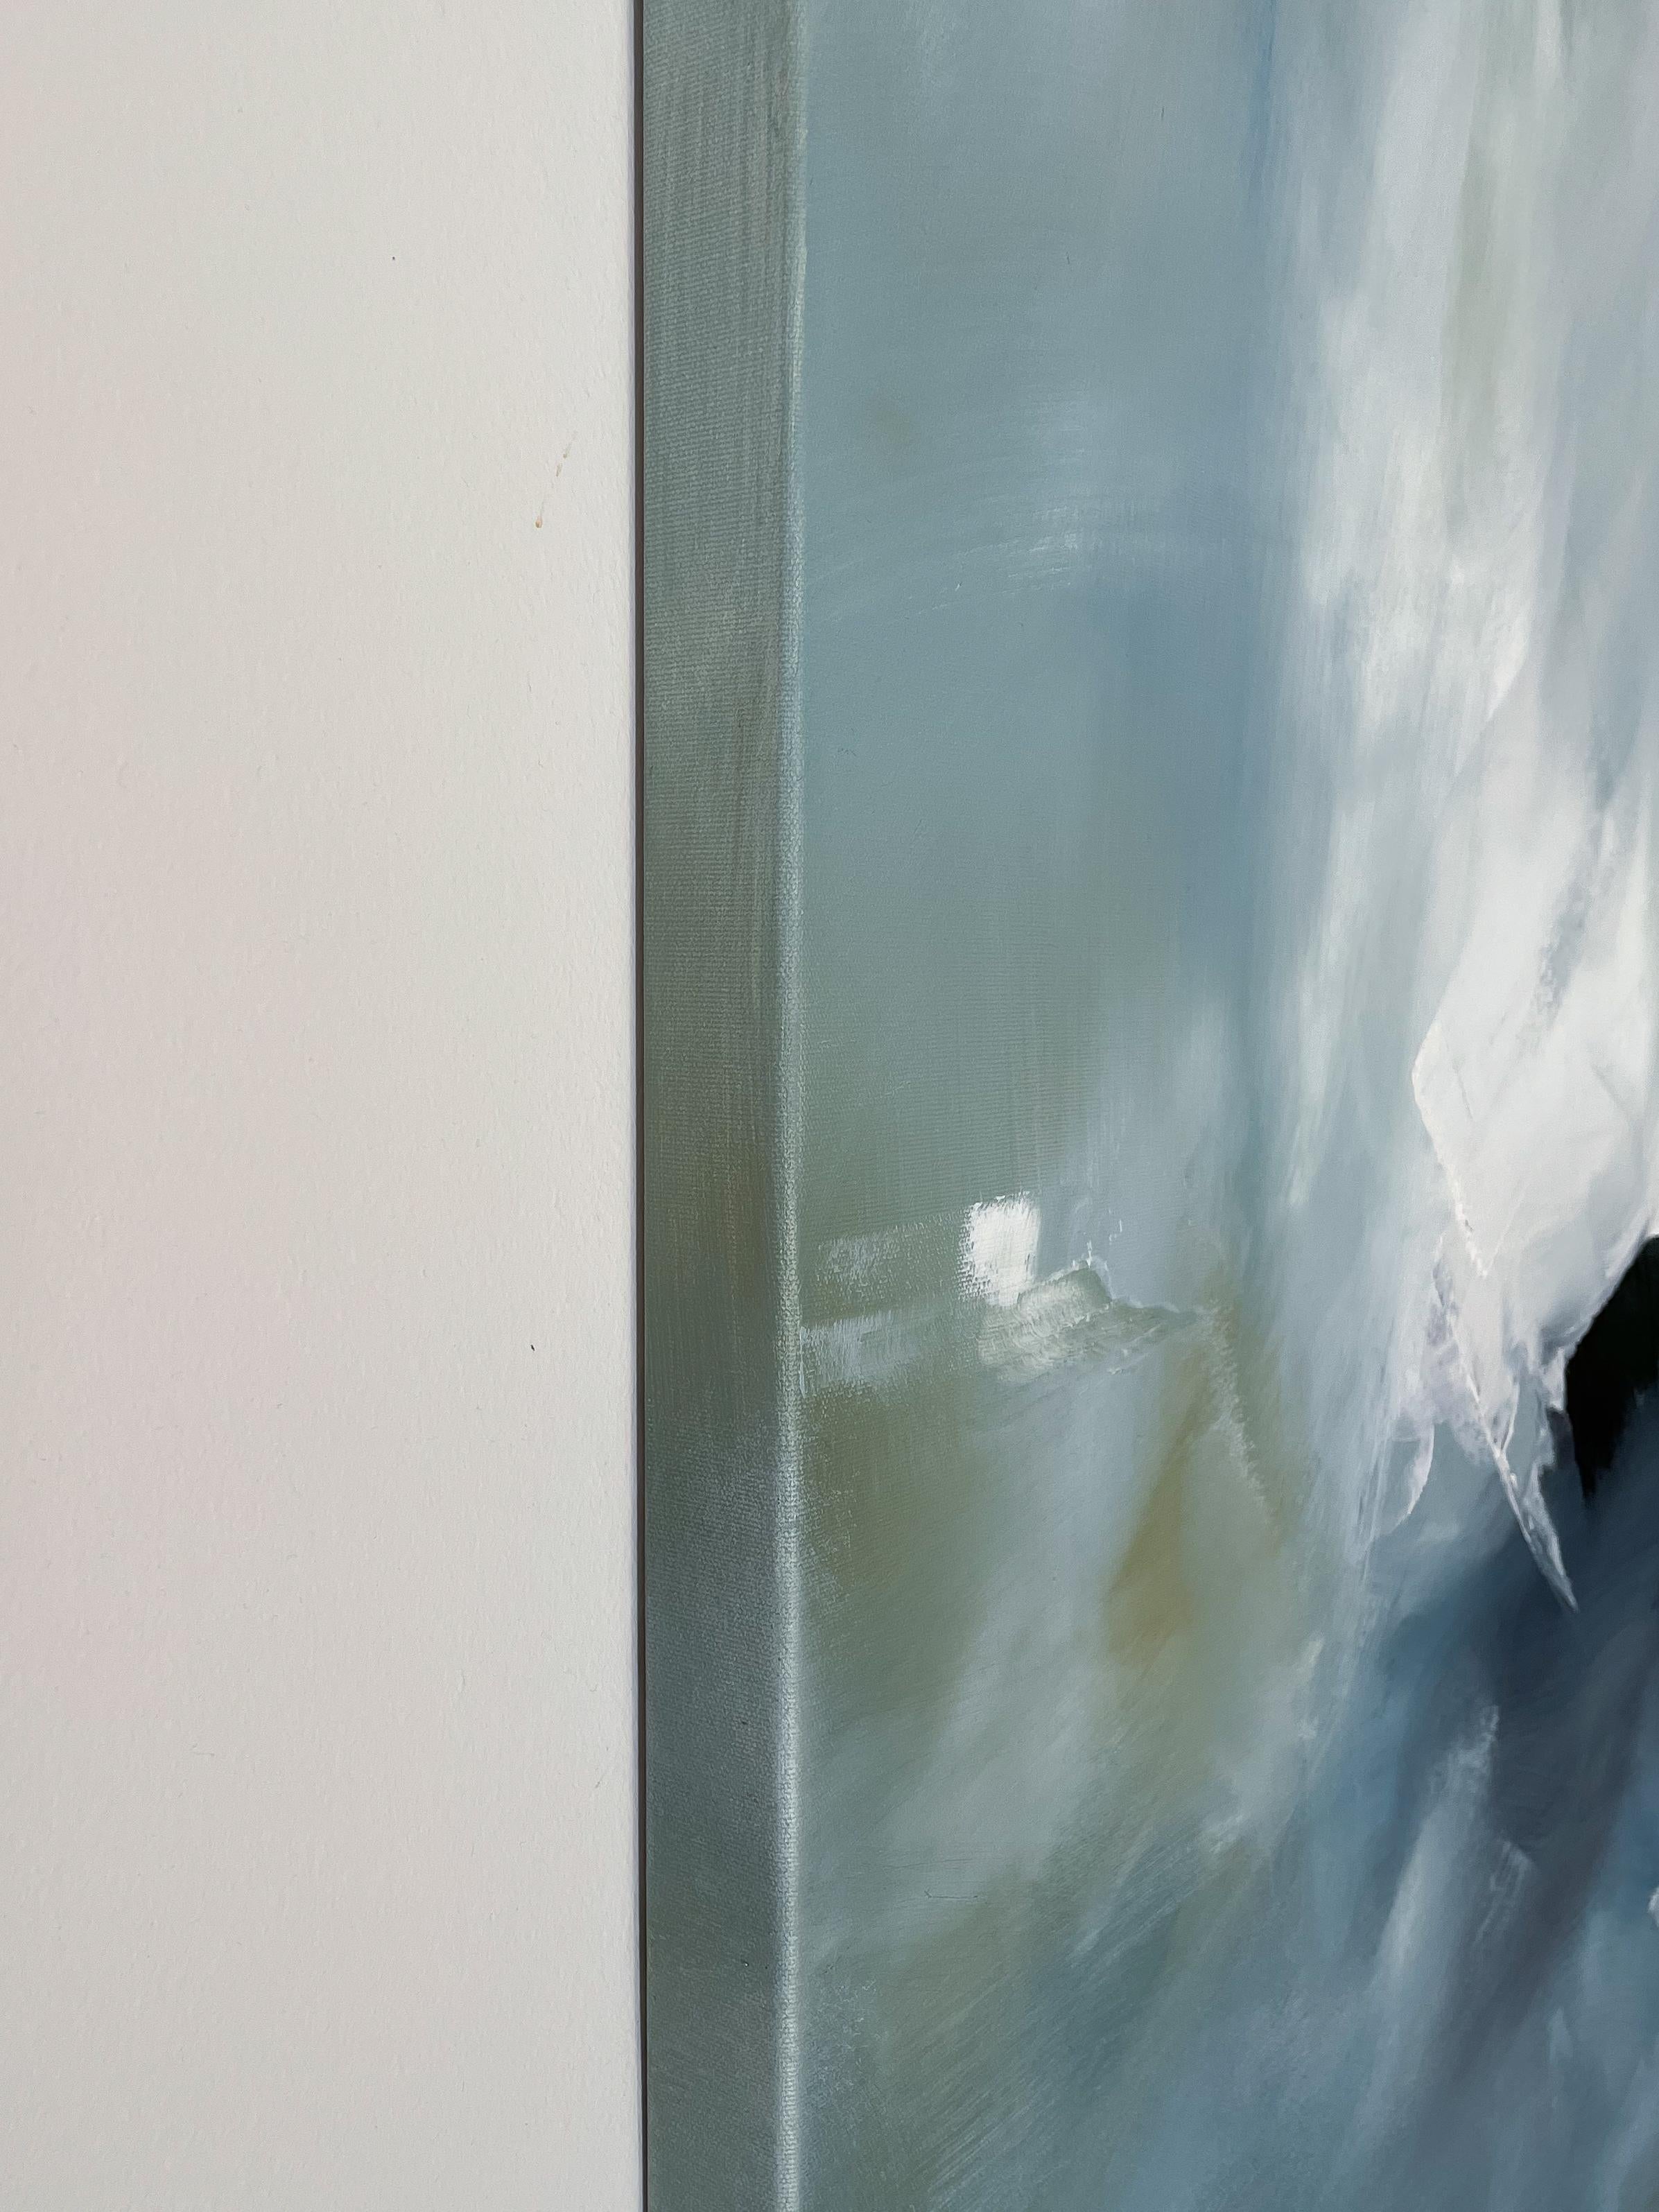 <p>Artist Comments<br>Artist Sarah Parsons paints a dramatic abstract, creating an atmosphere of calm and serenity. She presents a response to life-altering seasons or situations and our power to choose our attitude as we navigate them. 